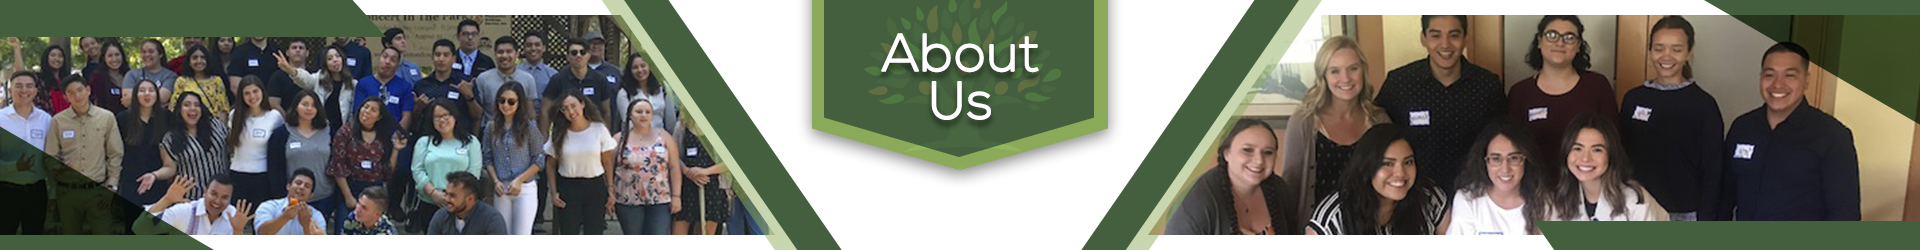 about us - banner